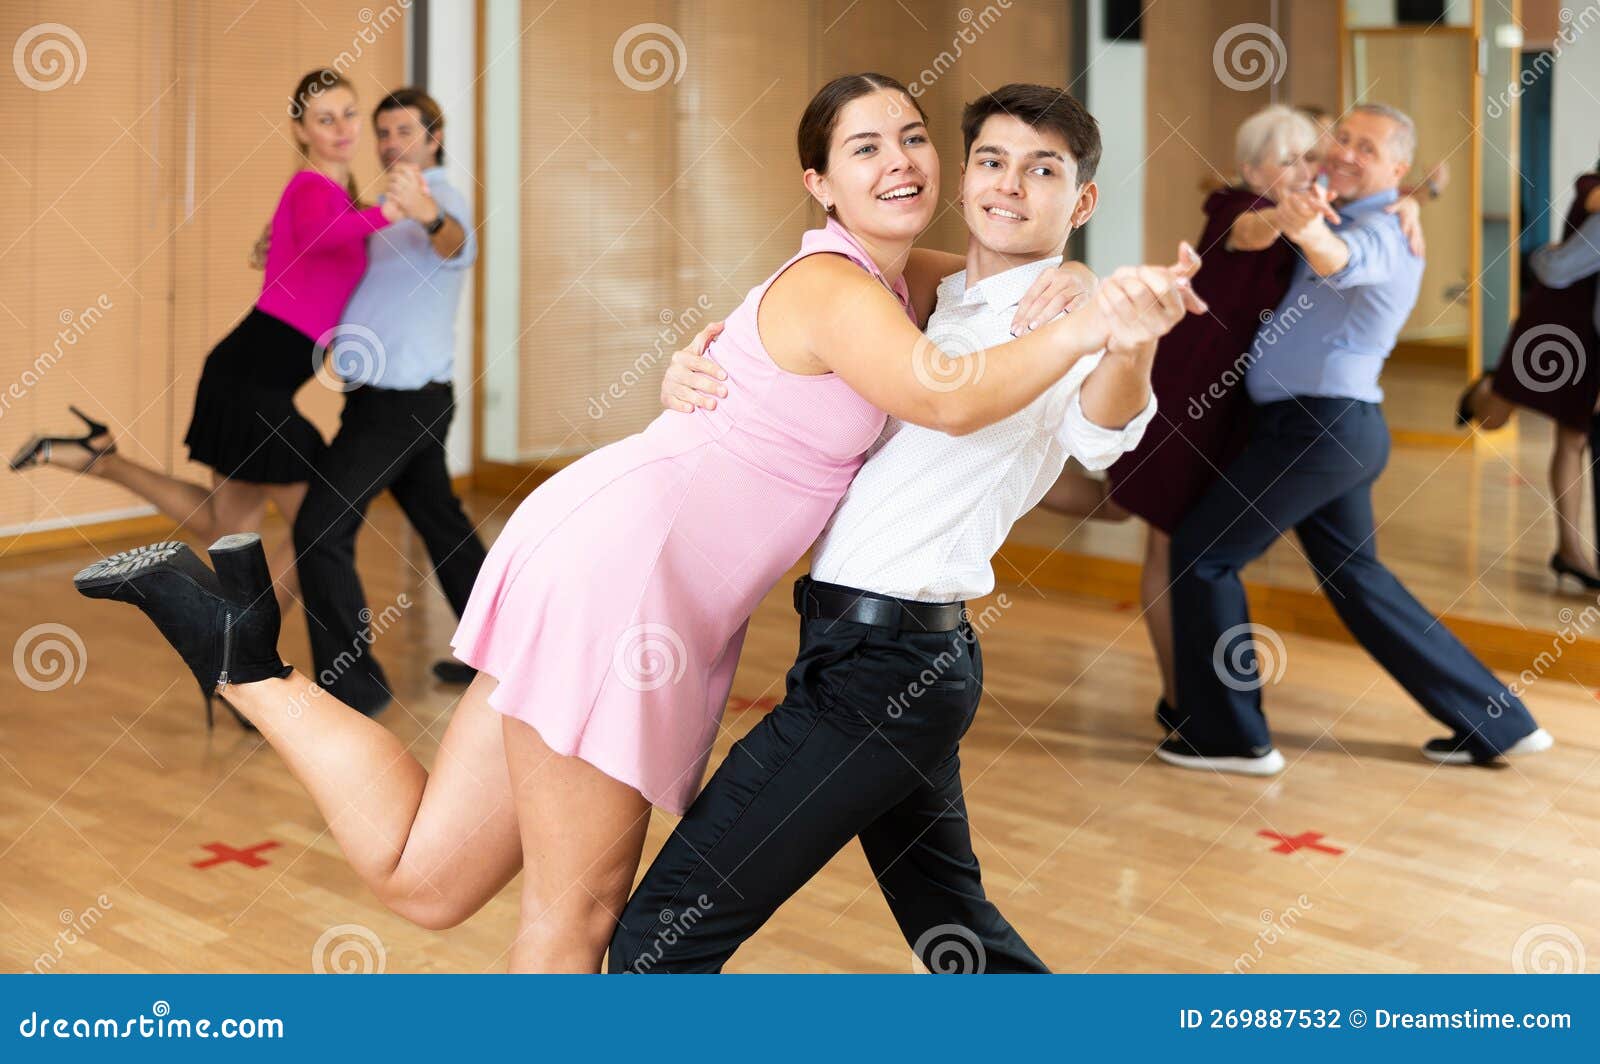 Cheerful Young Guy And Girl Practicing Ballroom Dances In Ballroom 